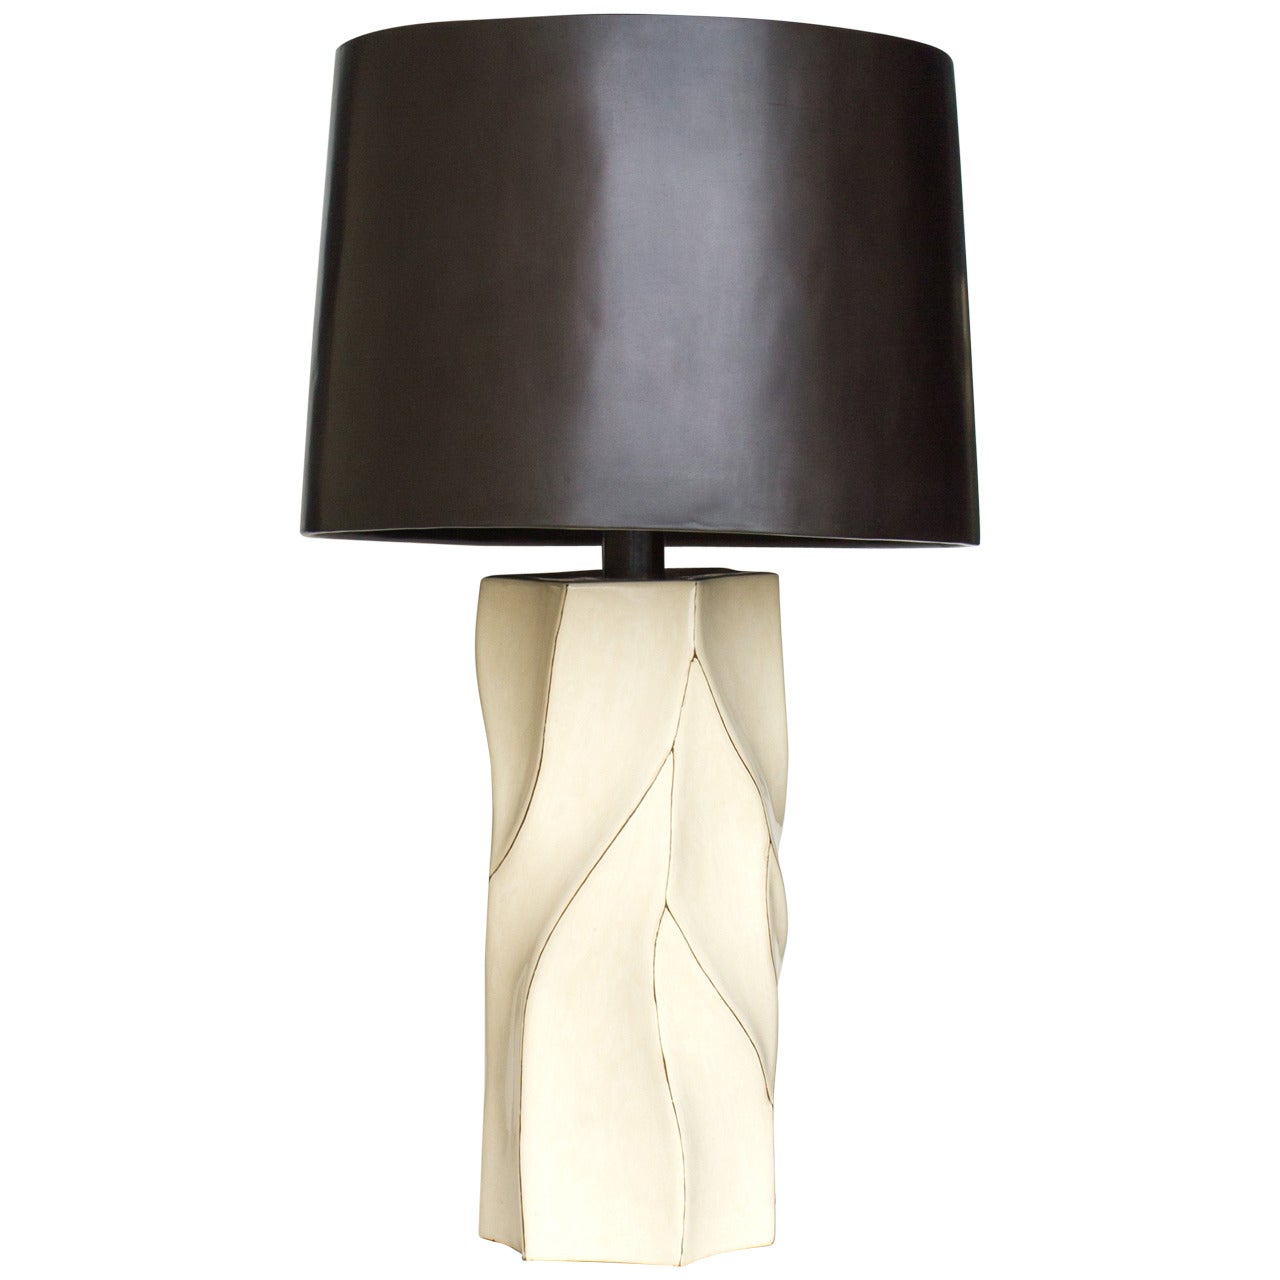 Tree Trunk Cream Lacquer Table Lamp